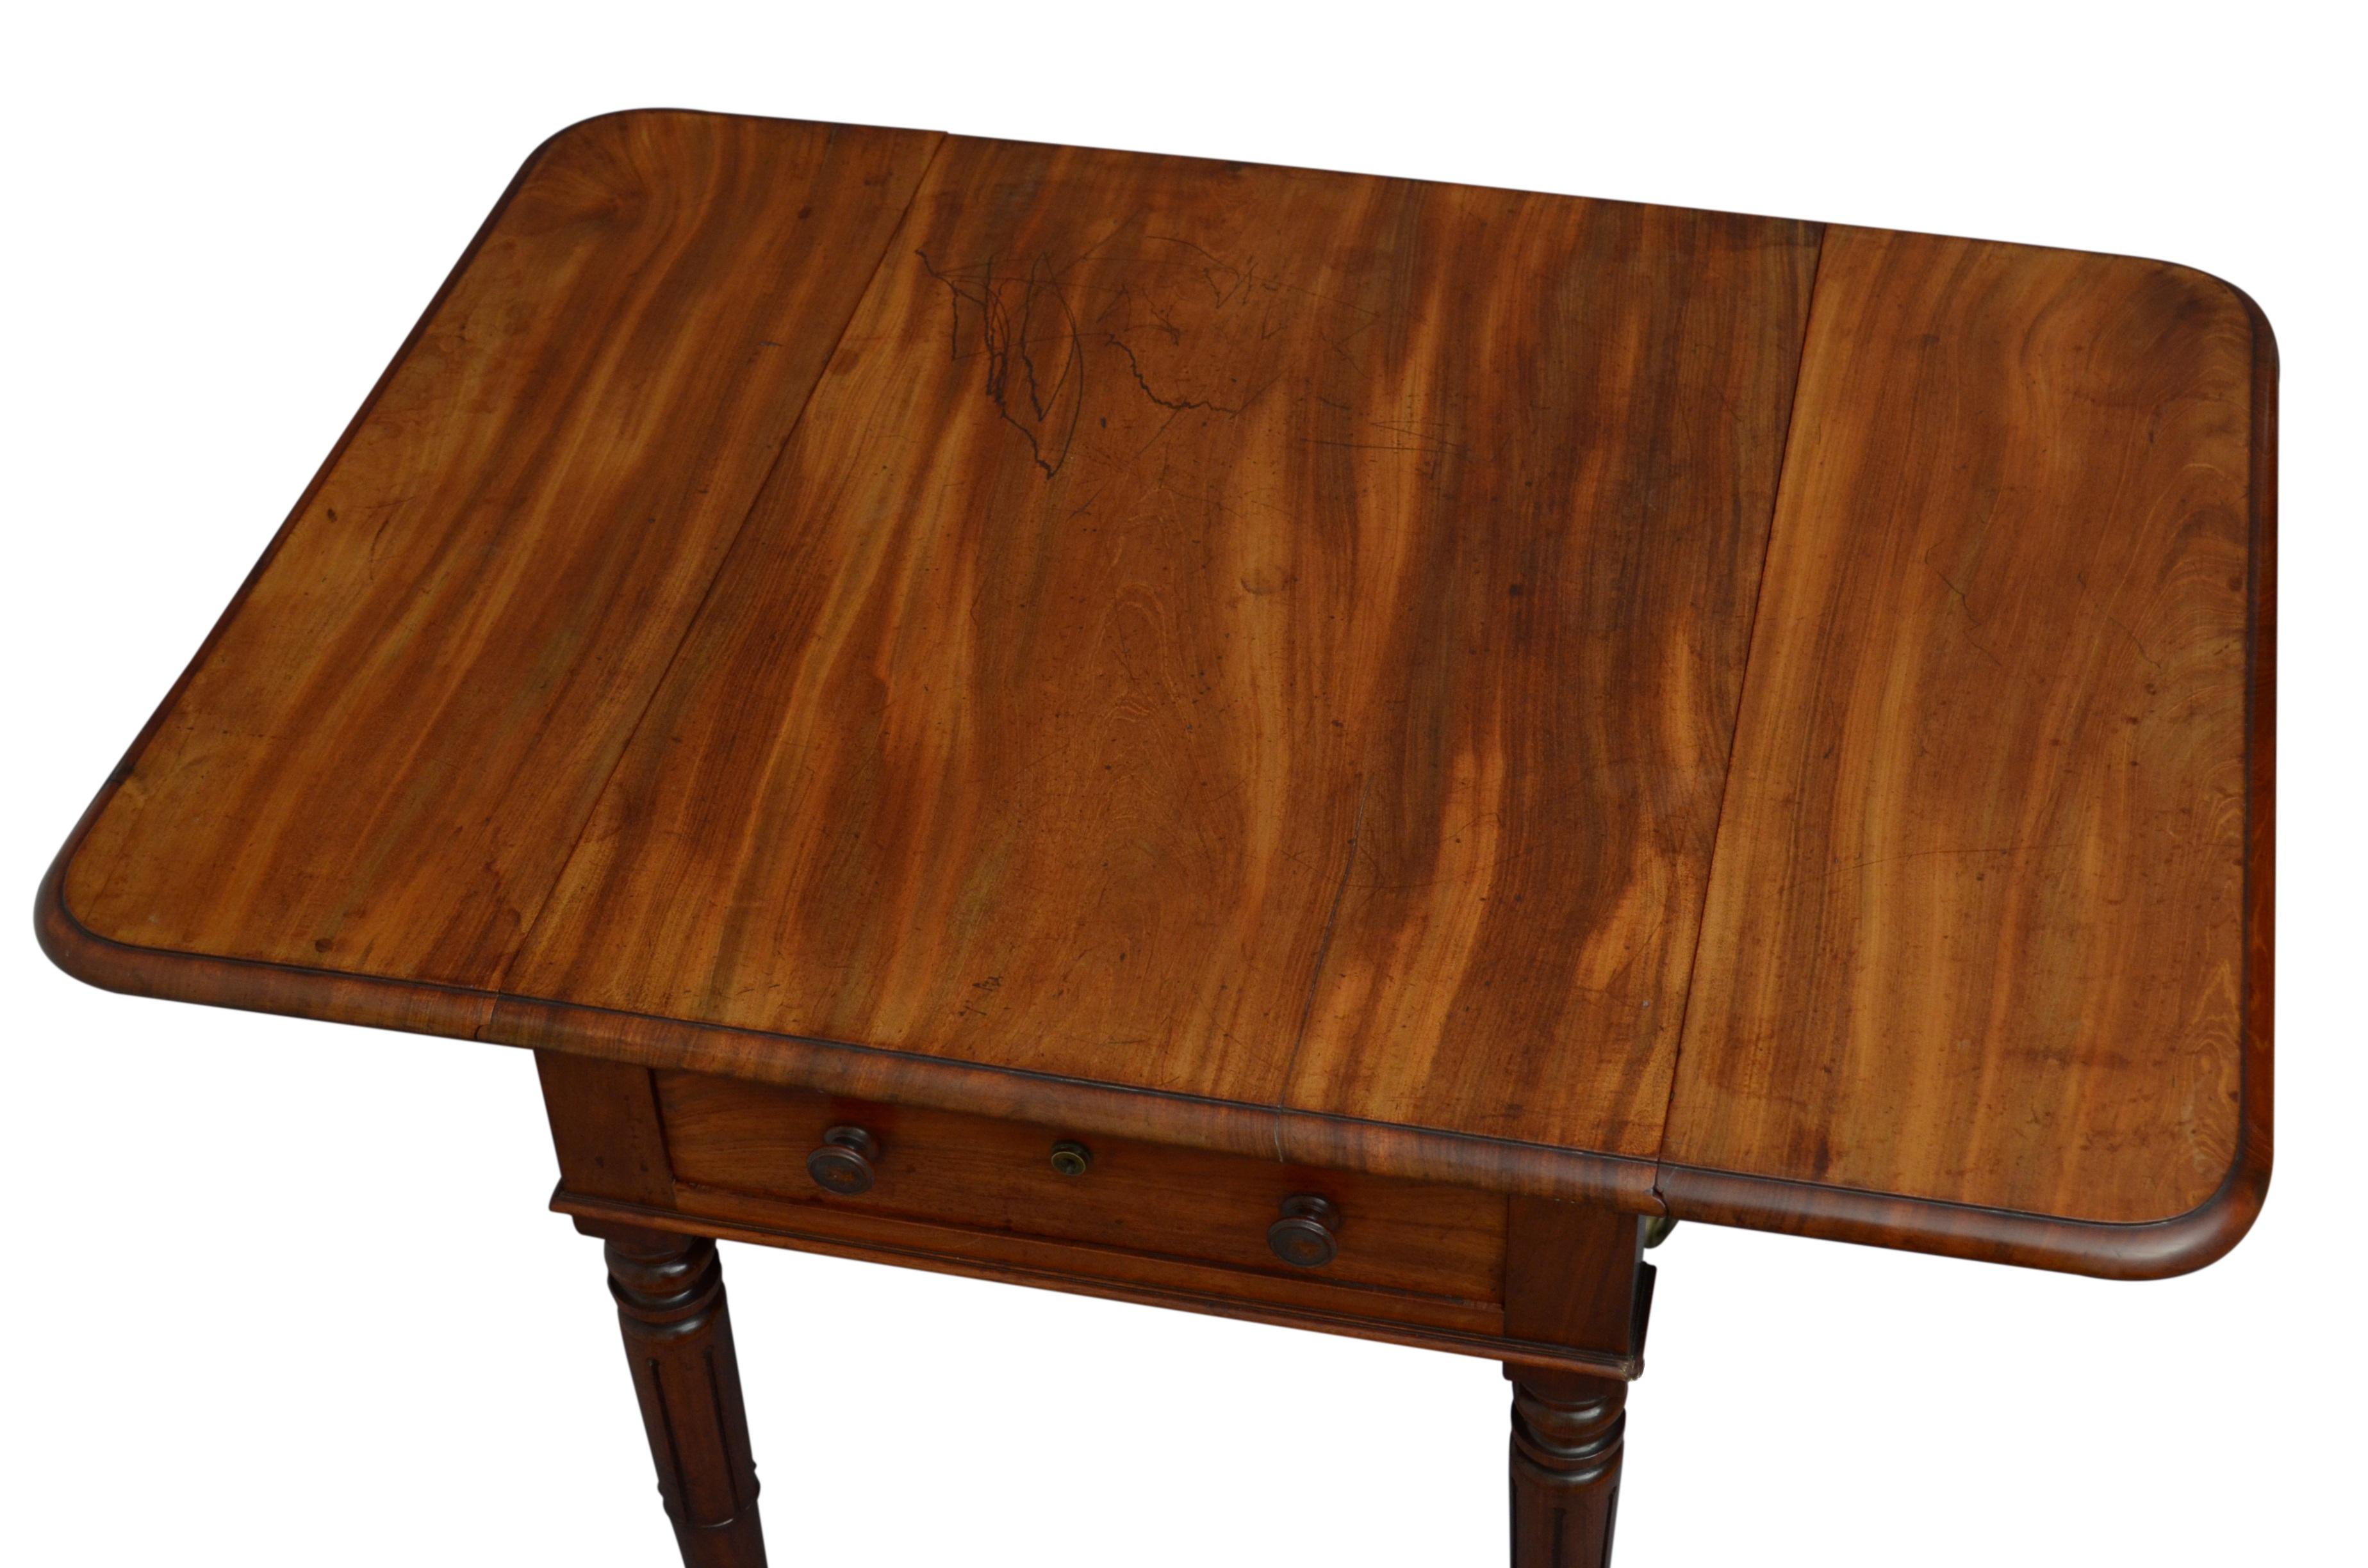 K0525 Fine quality William IV Pembroke table in mahogany, having drop leaf solid and figured mahogany top above a mahogany lined frieze drawer and dummy drawer to the back both fitted with original turned knobs, raised on slender turned and tapered